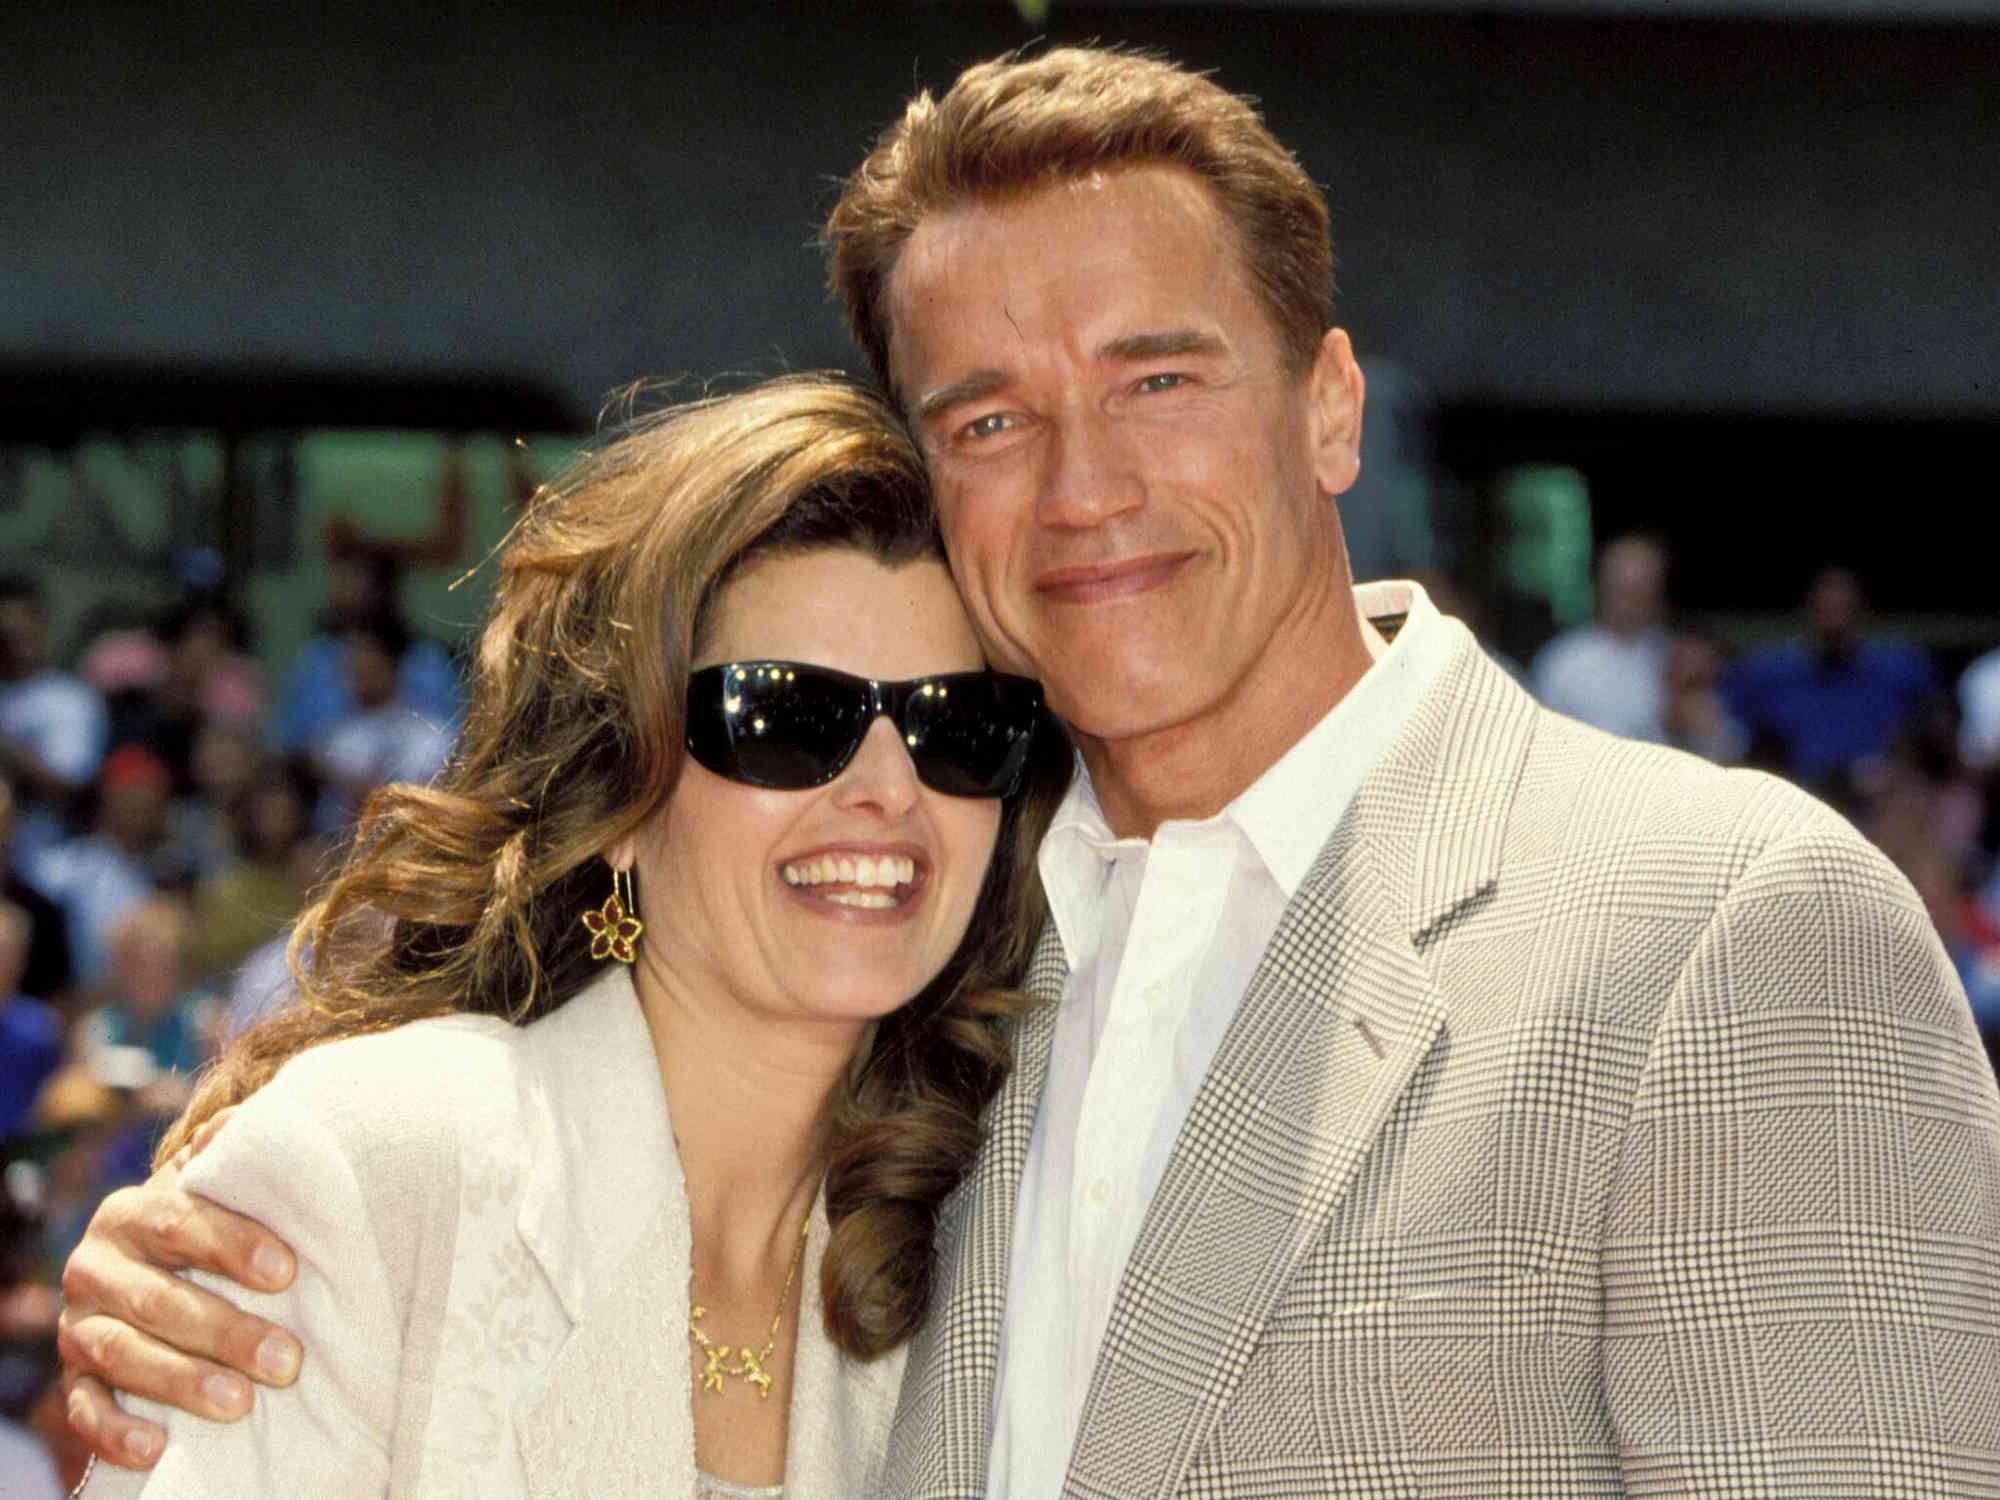 Arnold Schwarzenegger (R) and wife Maria Shriver during Arnold Schwarzenegger Footprint Ceremony at Mann's Chinese Theater in Hollywood, California, United States